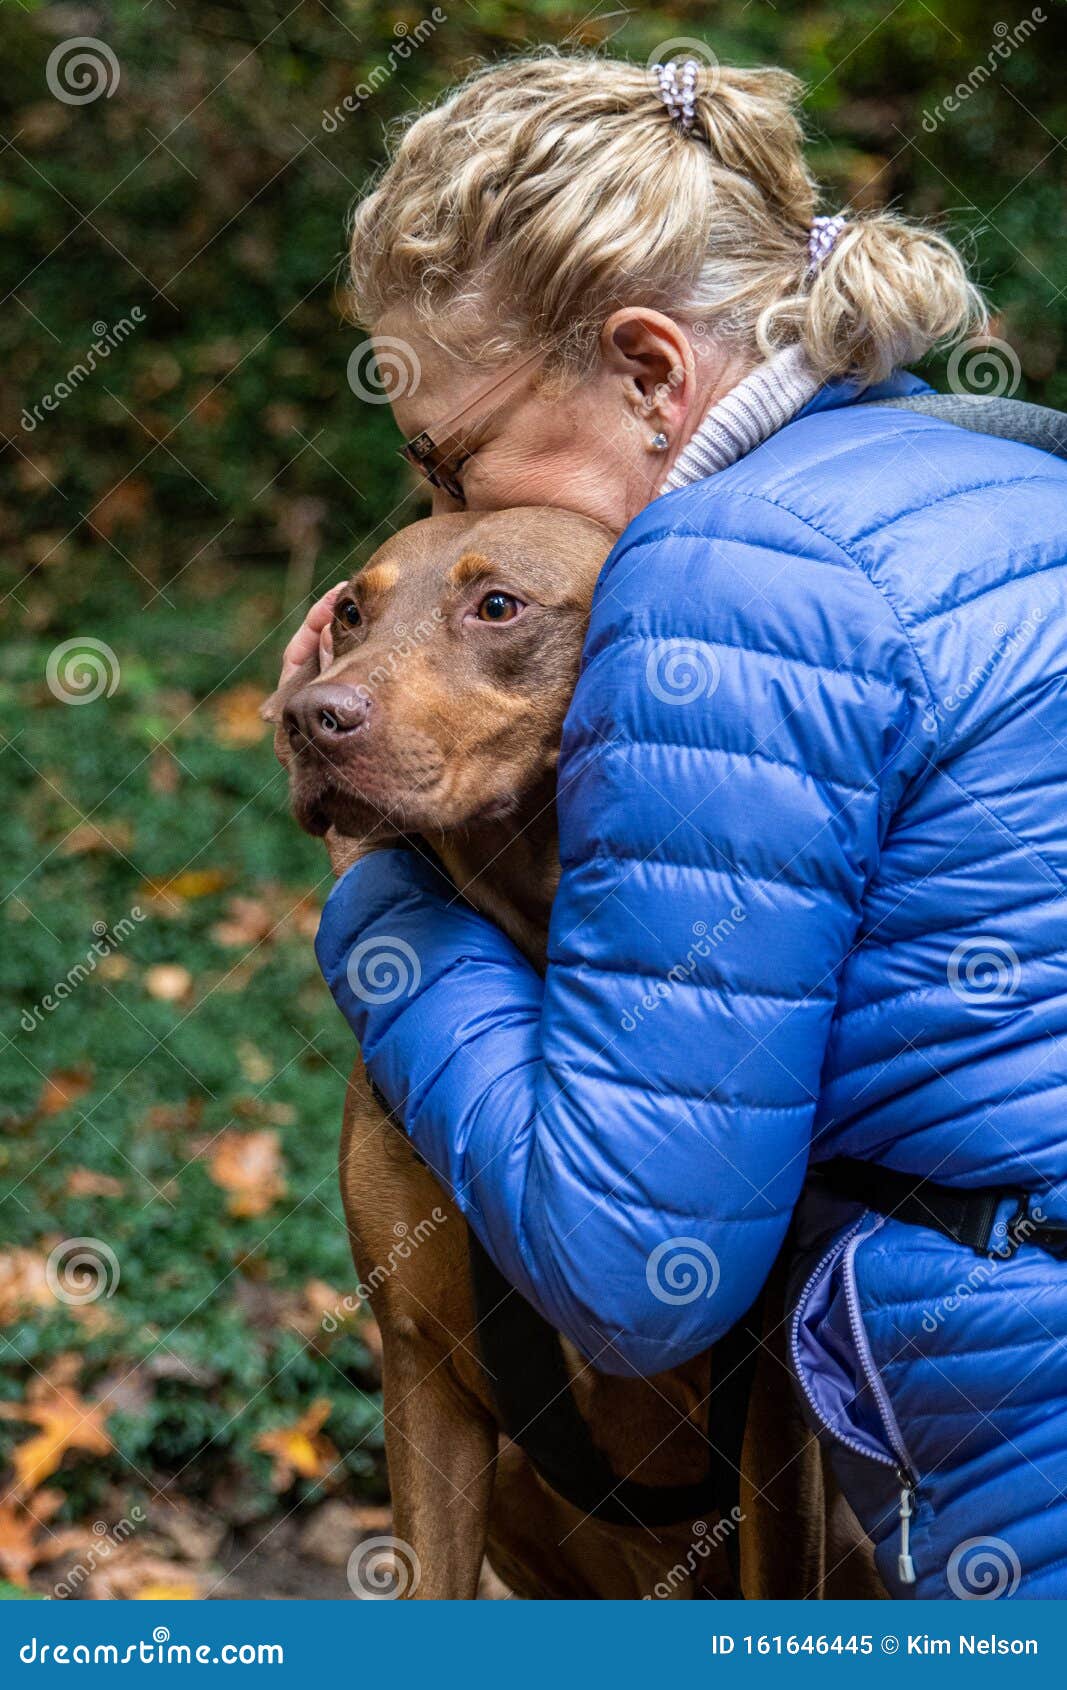 blond woman hugging two toned brown doberman mix rescue dog, outside in nature